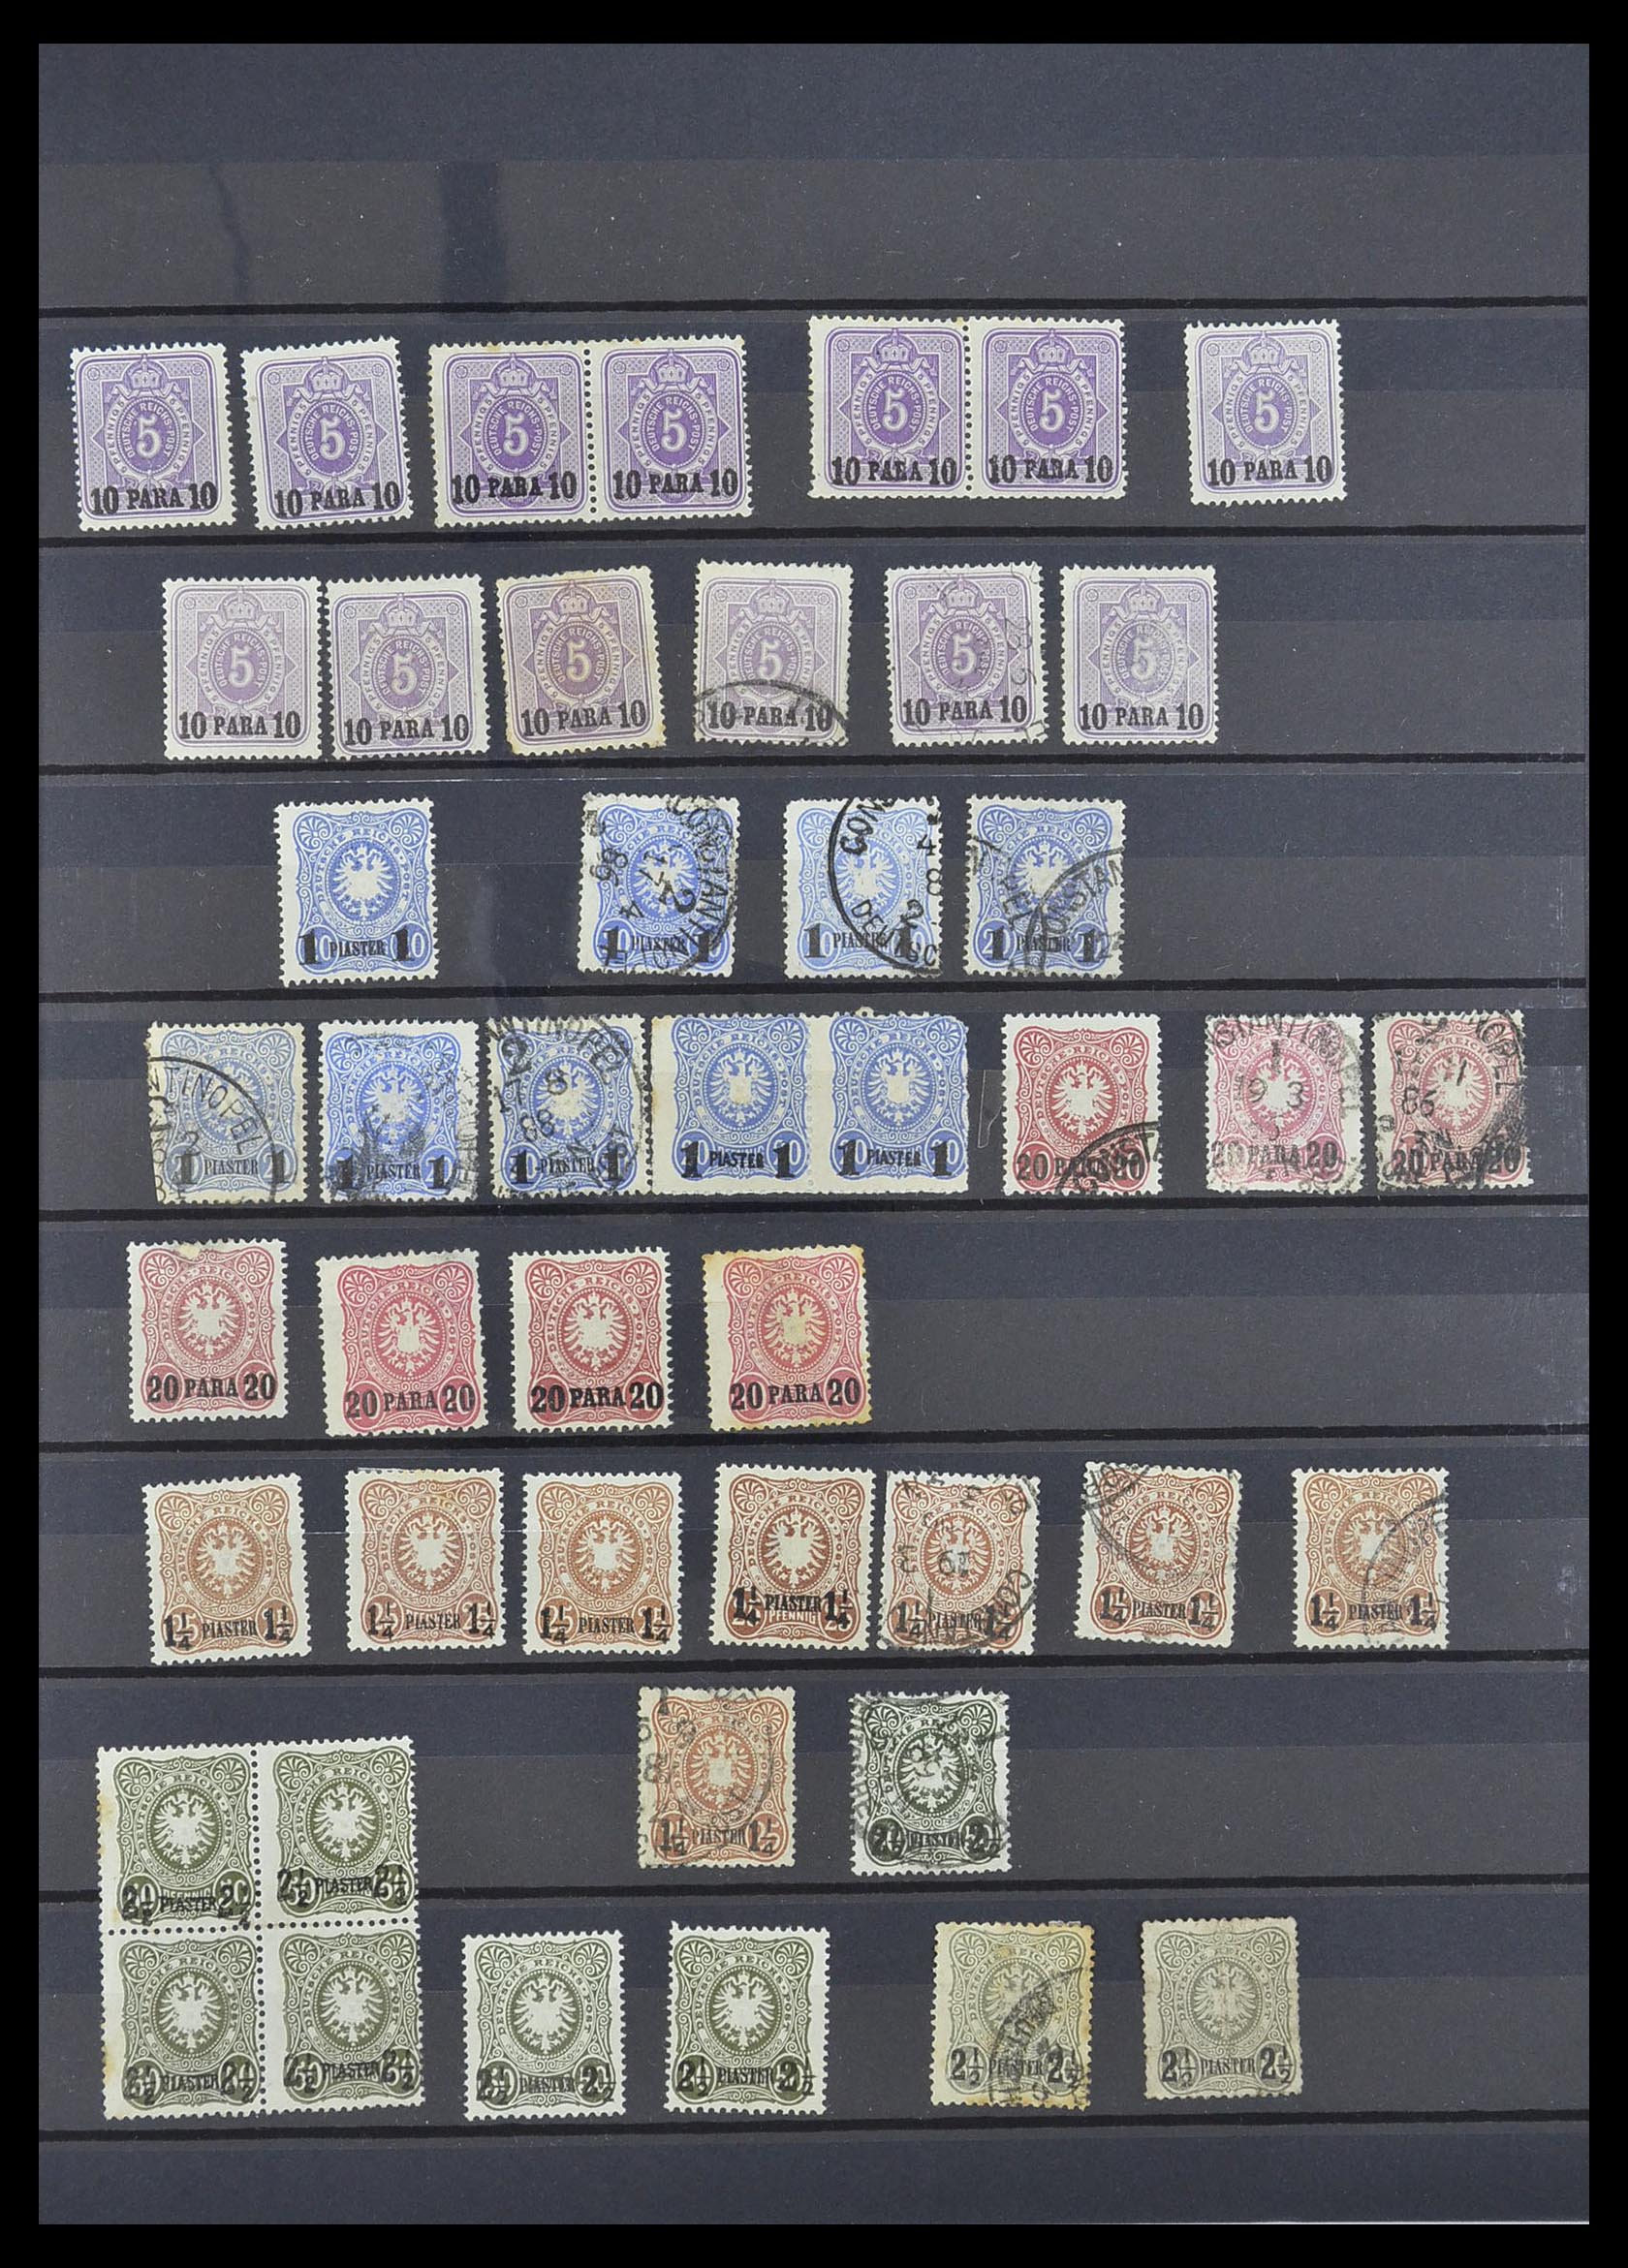 33756 029 - Stamp collection 33756 World classic 1850-1930.